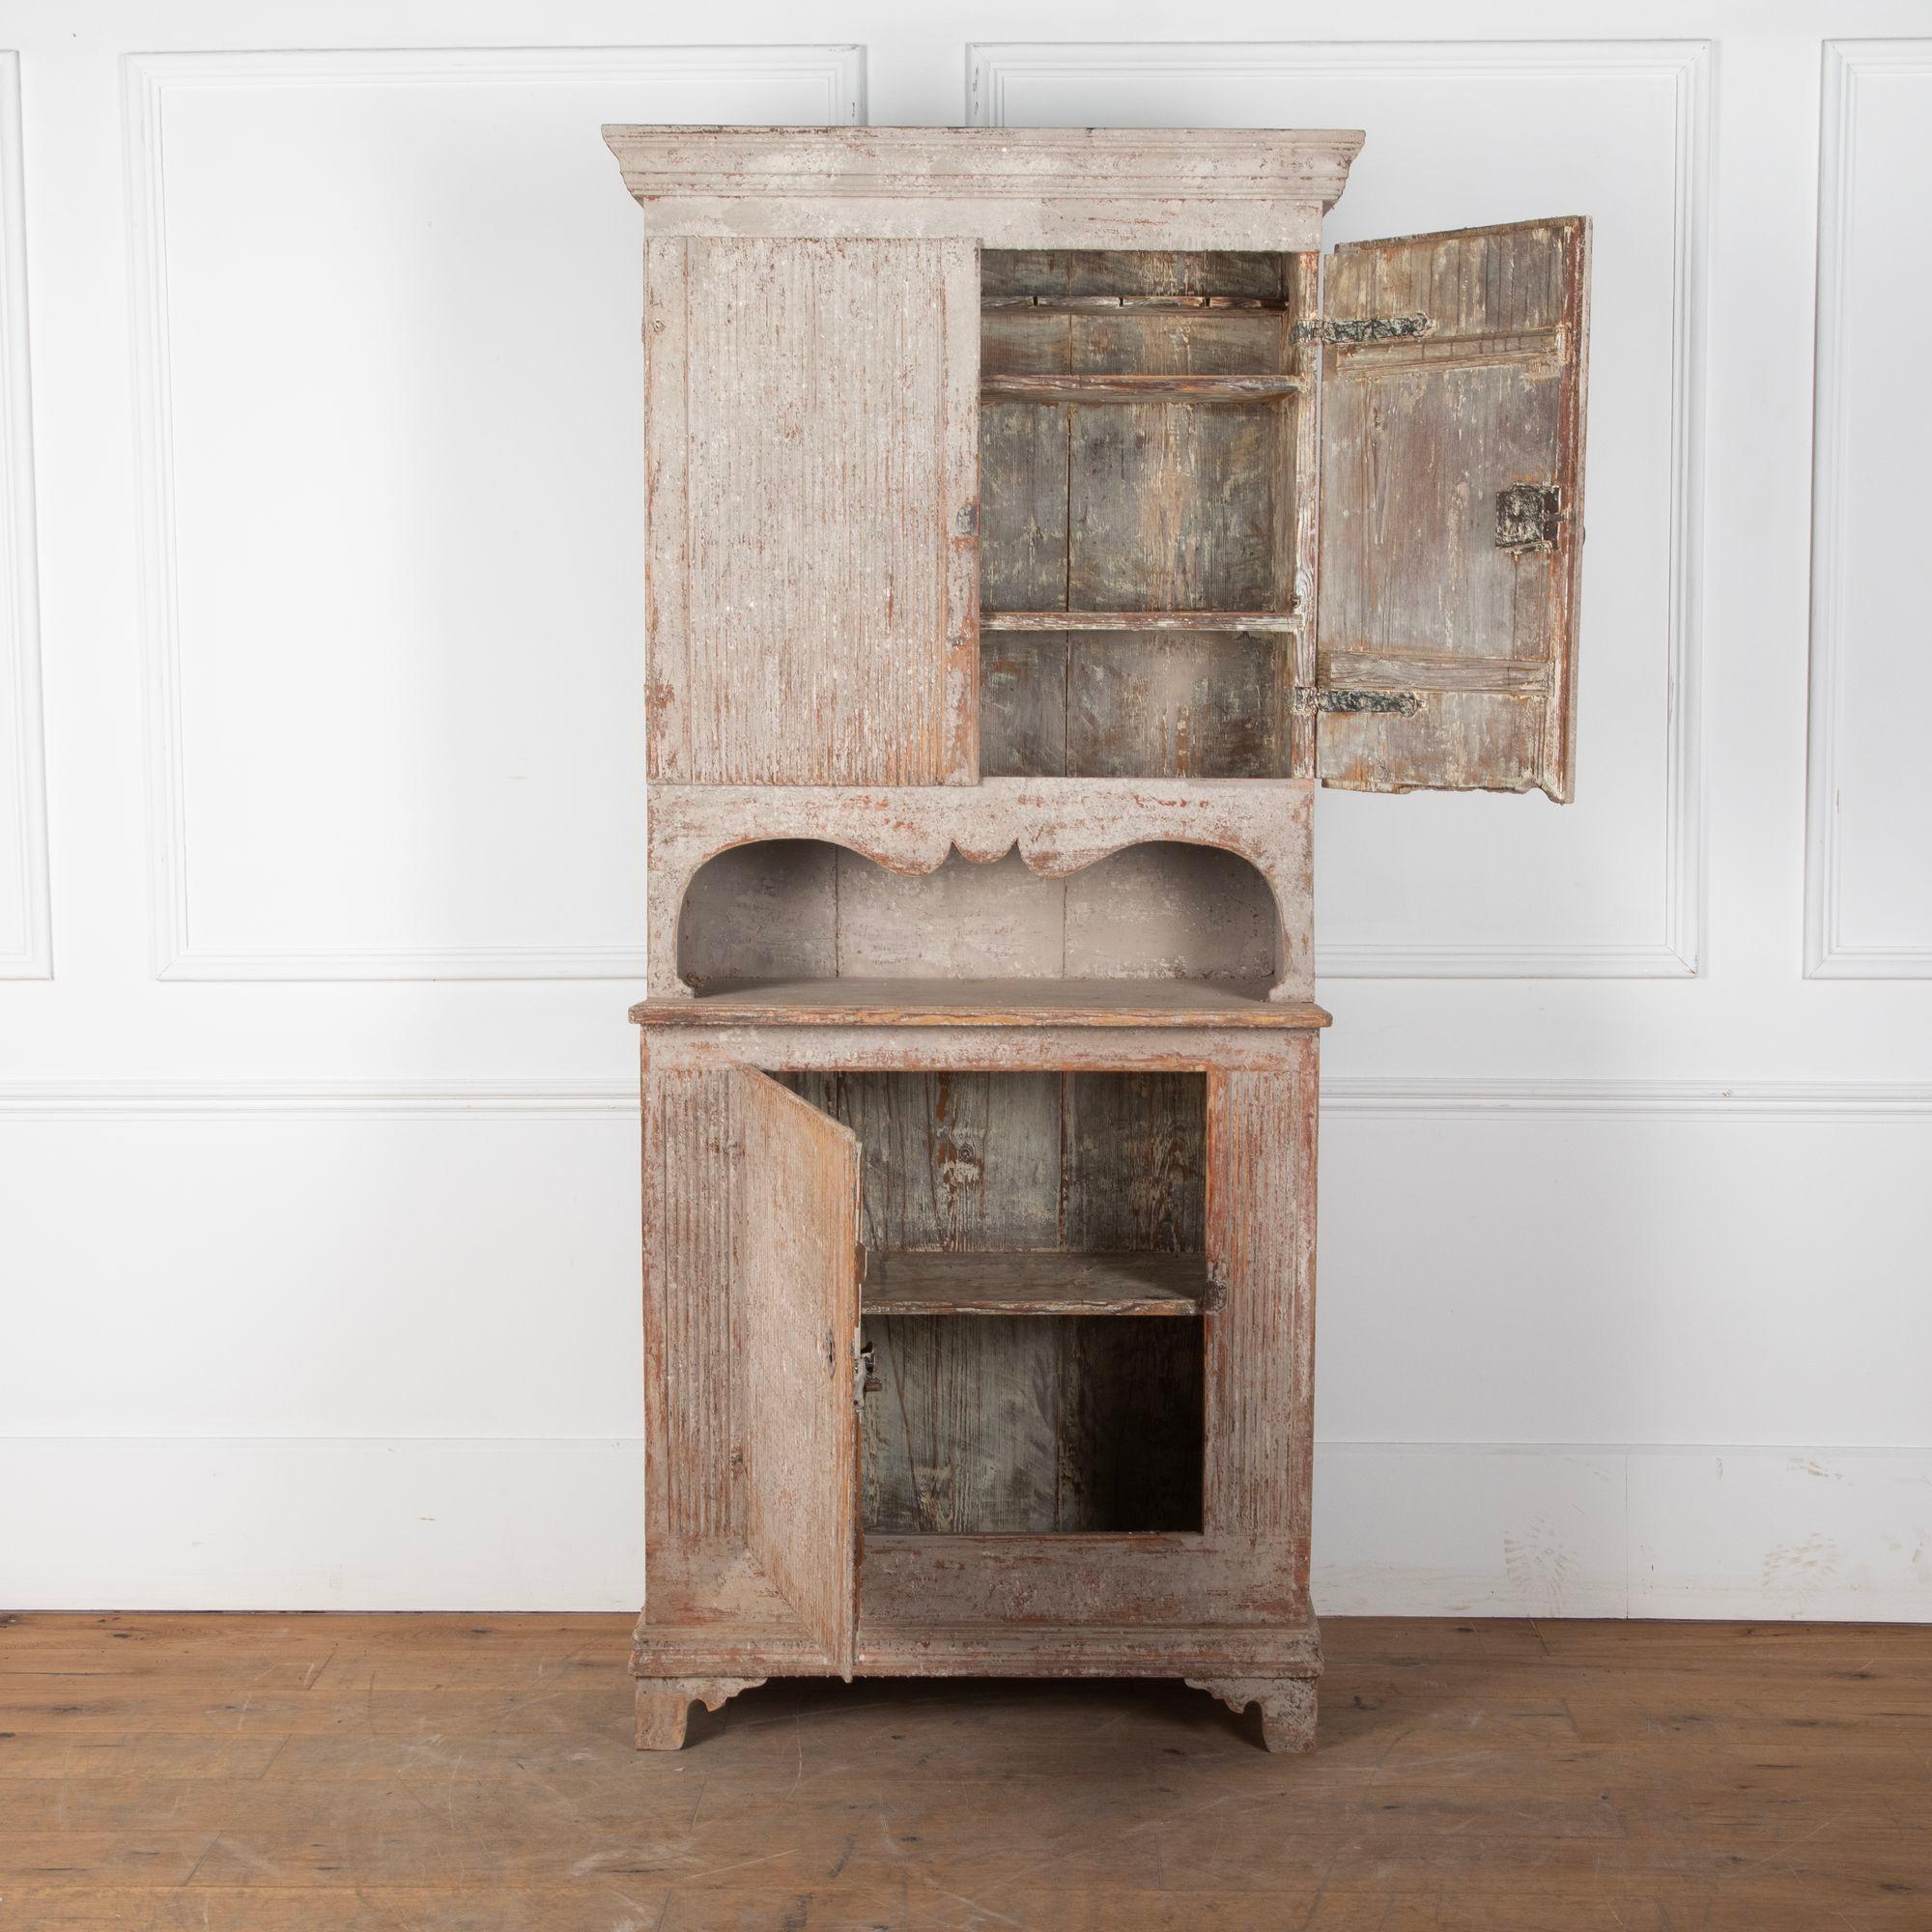 Late 18th Century Gustavian Cupboard with reeded doors.
Later painted and dry scraped to old paint on the inside, and the feet were replaced at a later date.
Circa 1790.